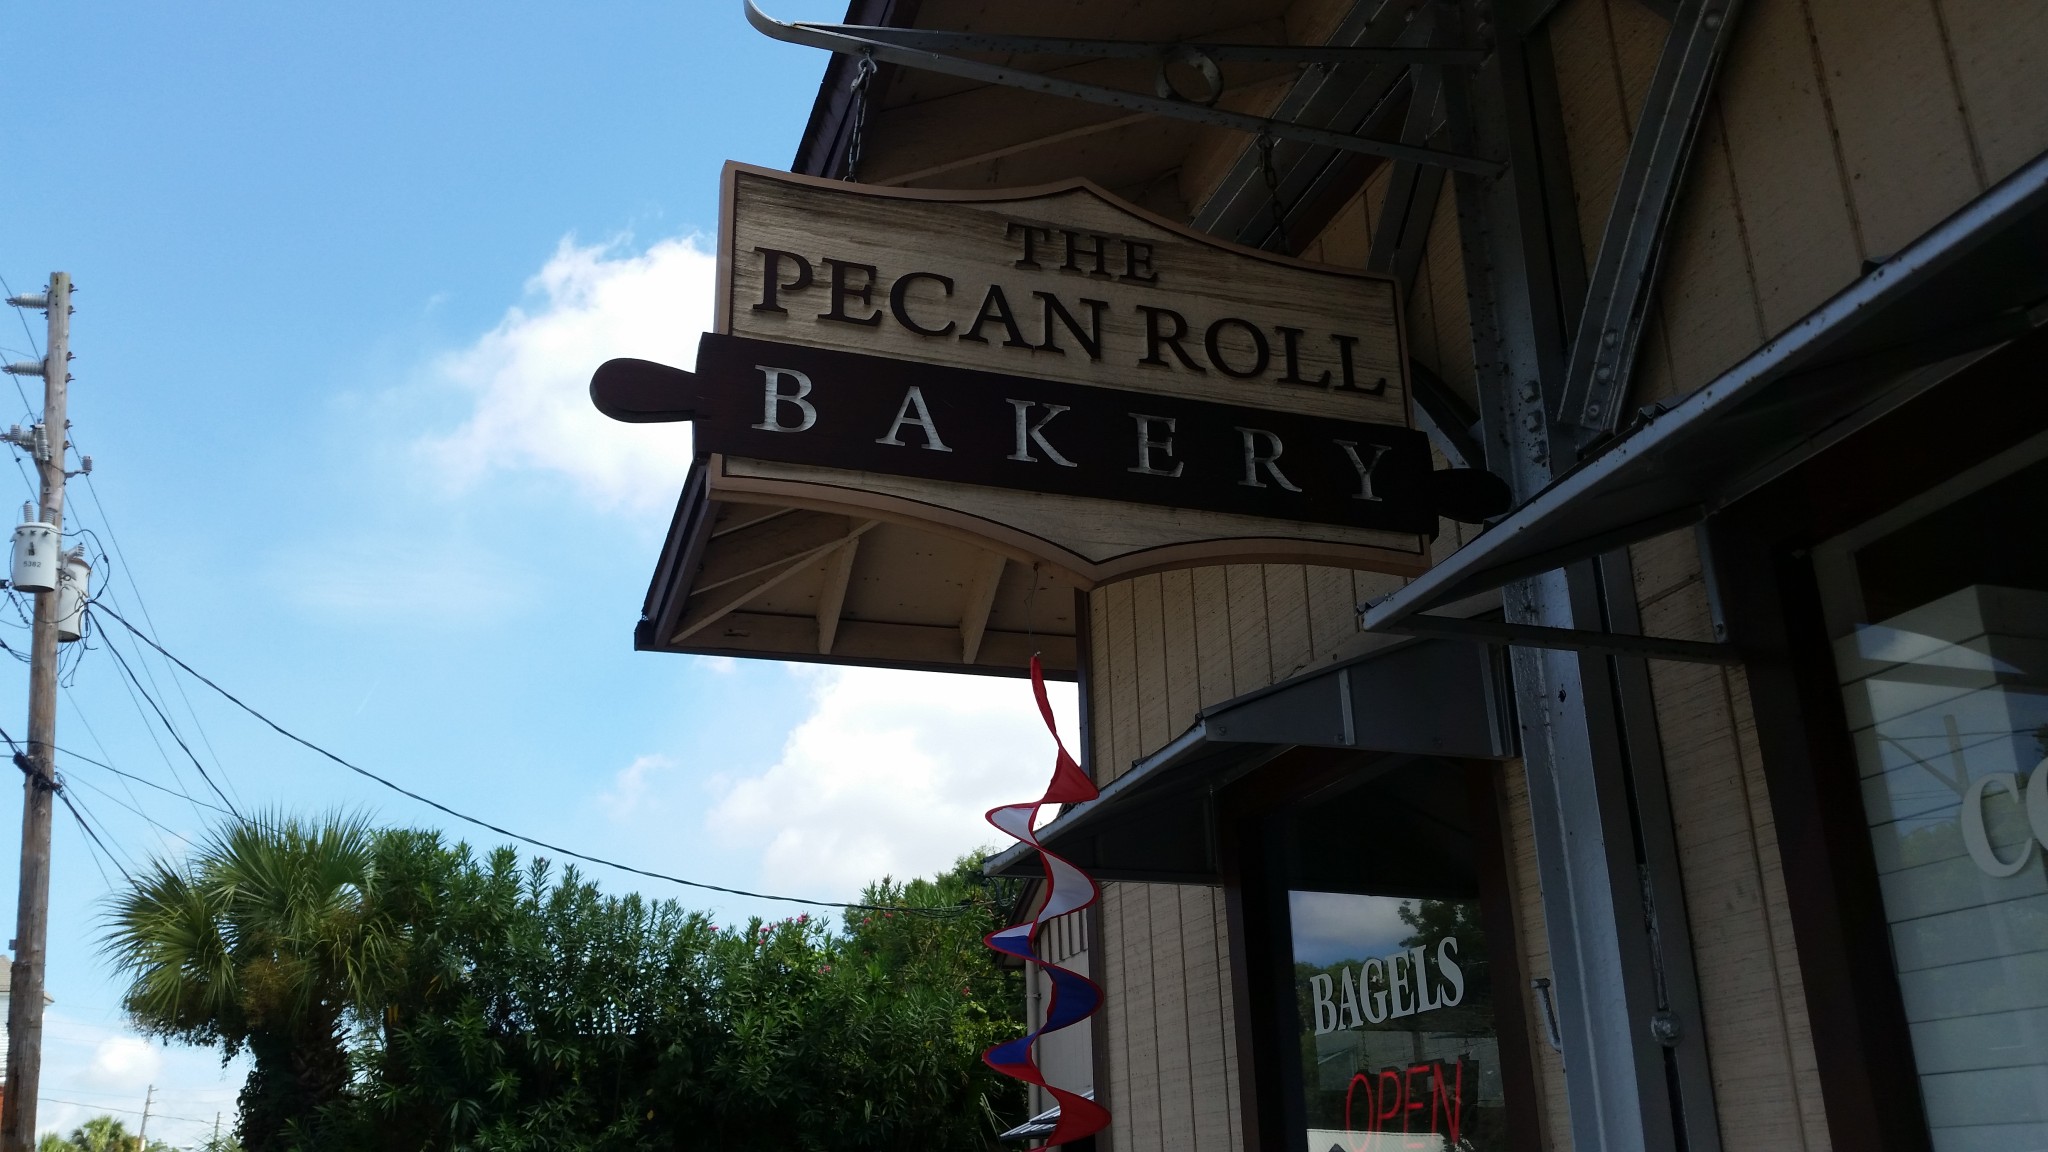 Pecan Roll Bakery - Sign